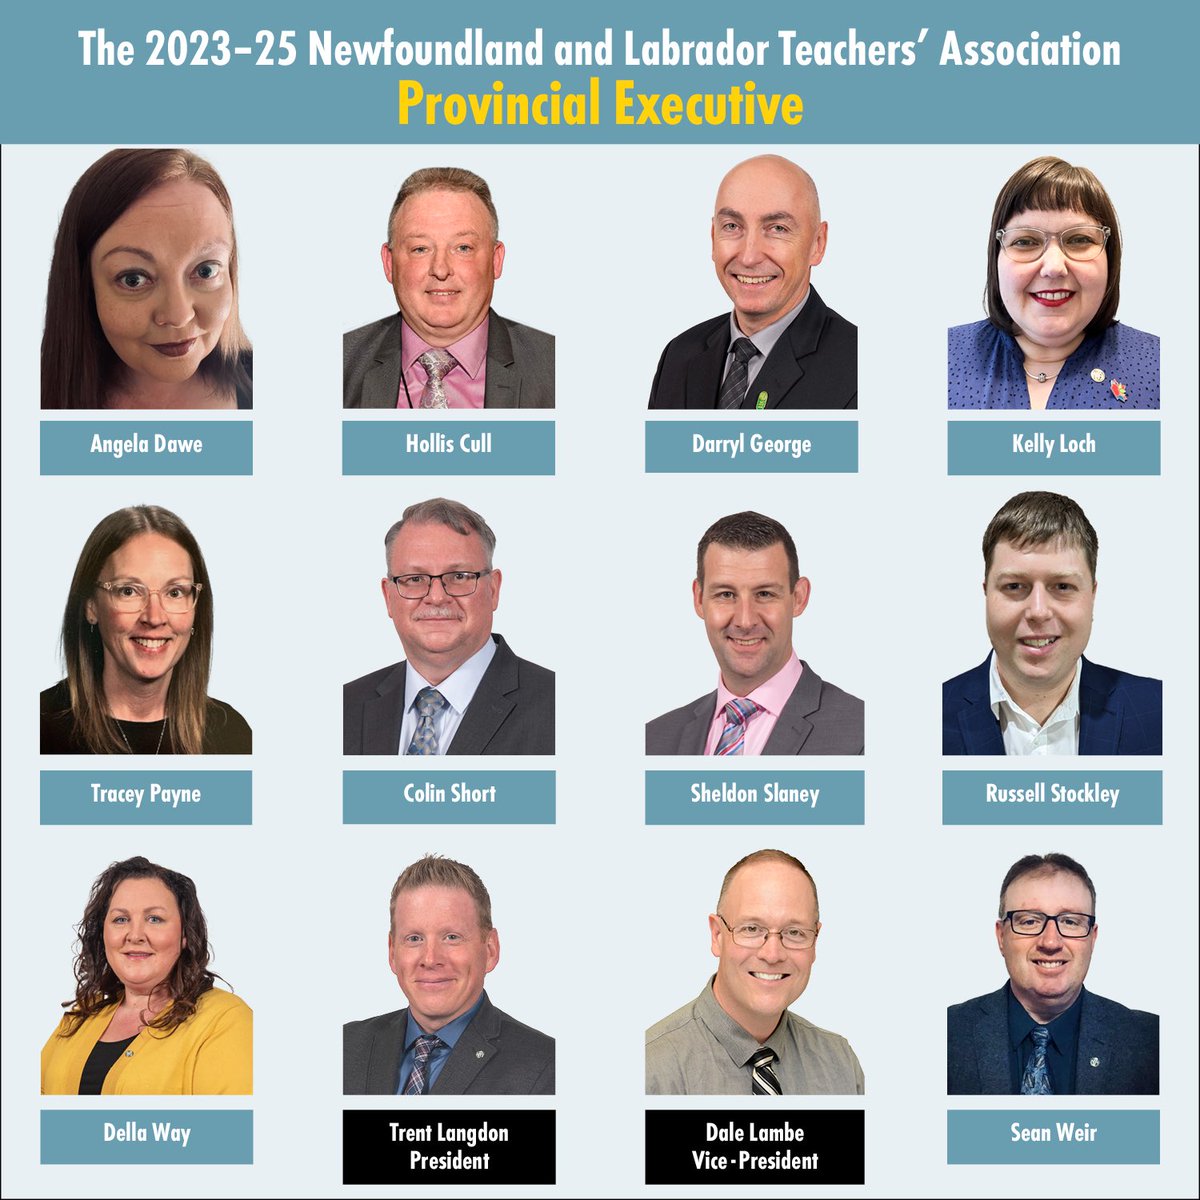 The 2023-25 @NLTeachersAssoc Provincial Executive has been elected by #NLTABGM23 More info can be found here ➡️ bit.ly/3UwR5qG

#CollectiveStrength 
#CollectiveAction